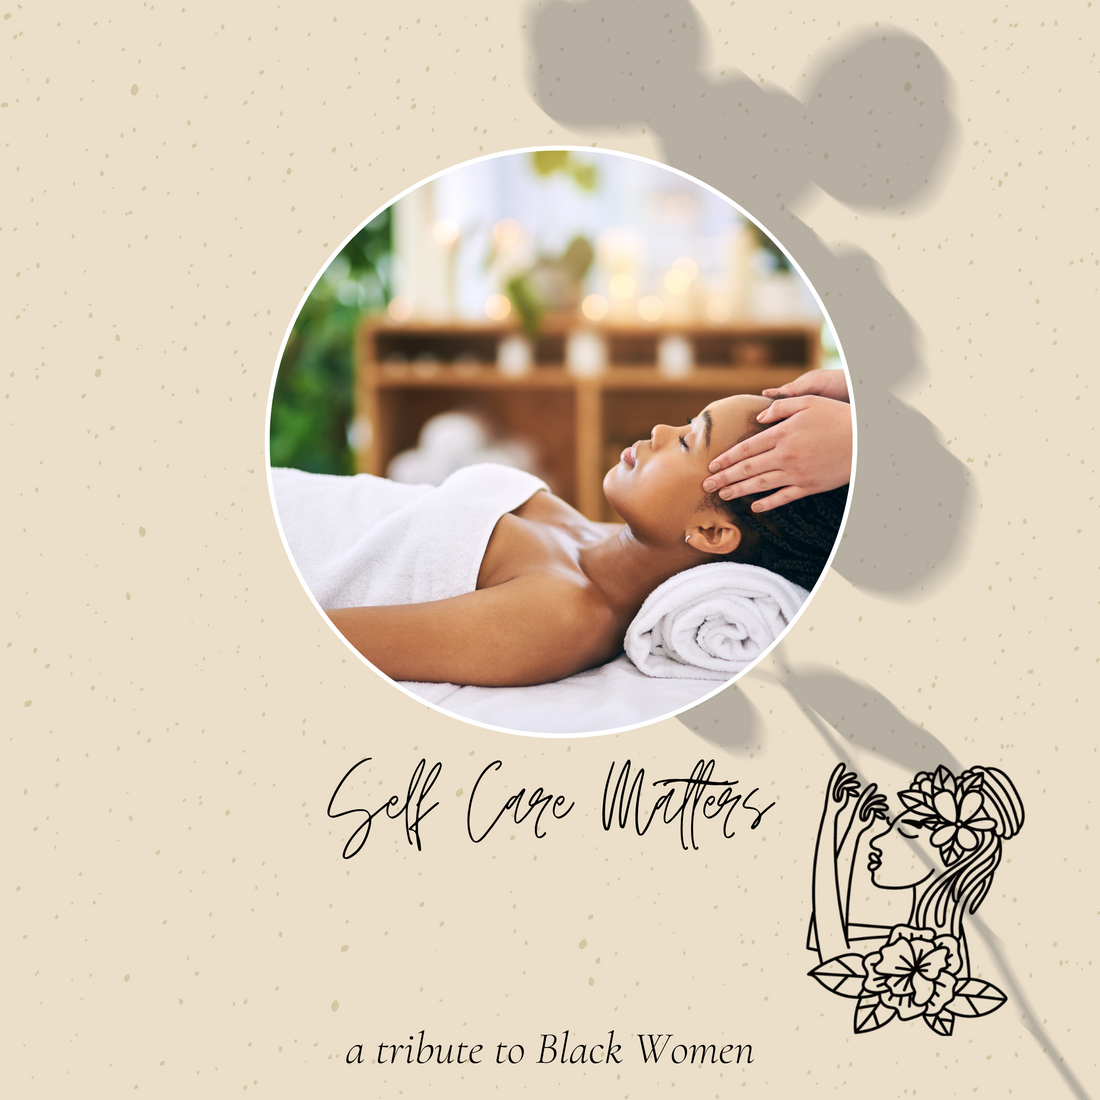 The Importance of Self-Care For Black Women. #SelfCareMatters